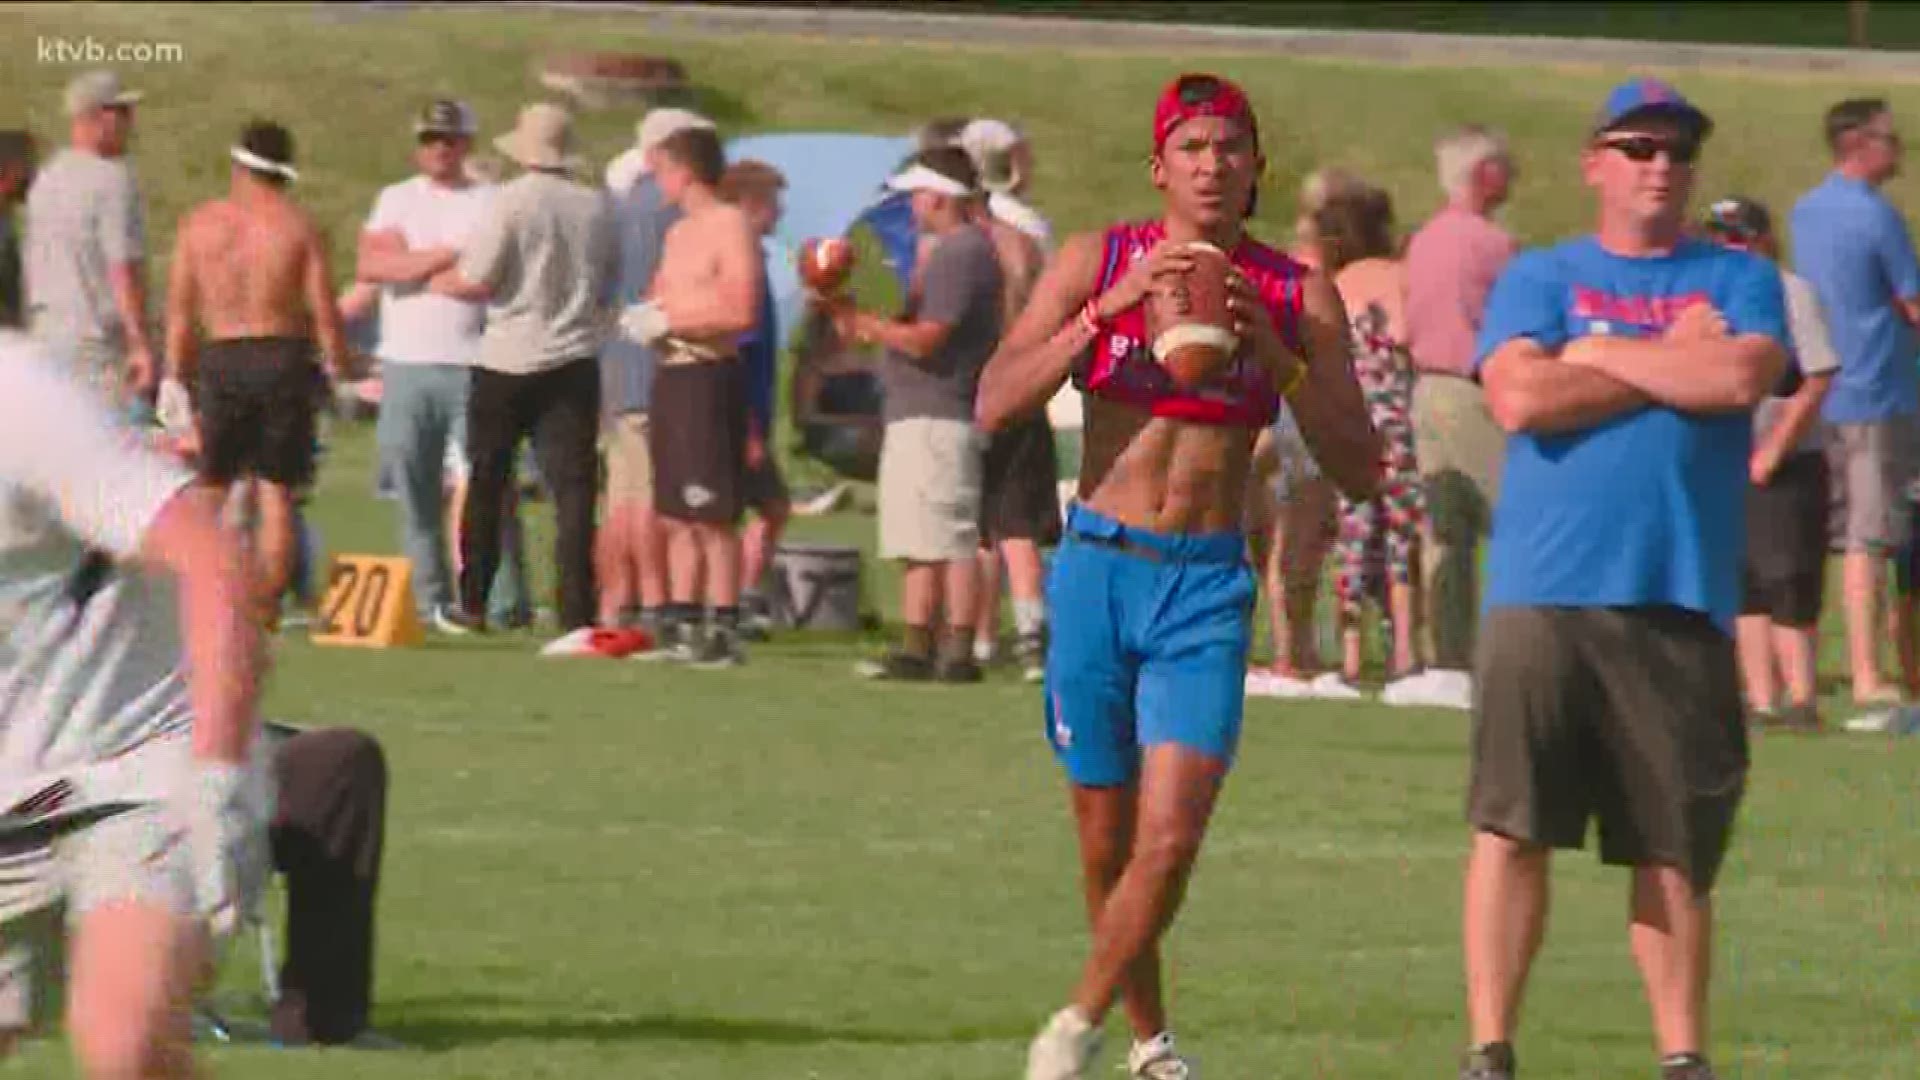 Highlights from the 2019 Famous Idaho Potato Bowl 7 on 7 passing tournament .